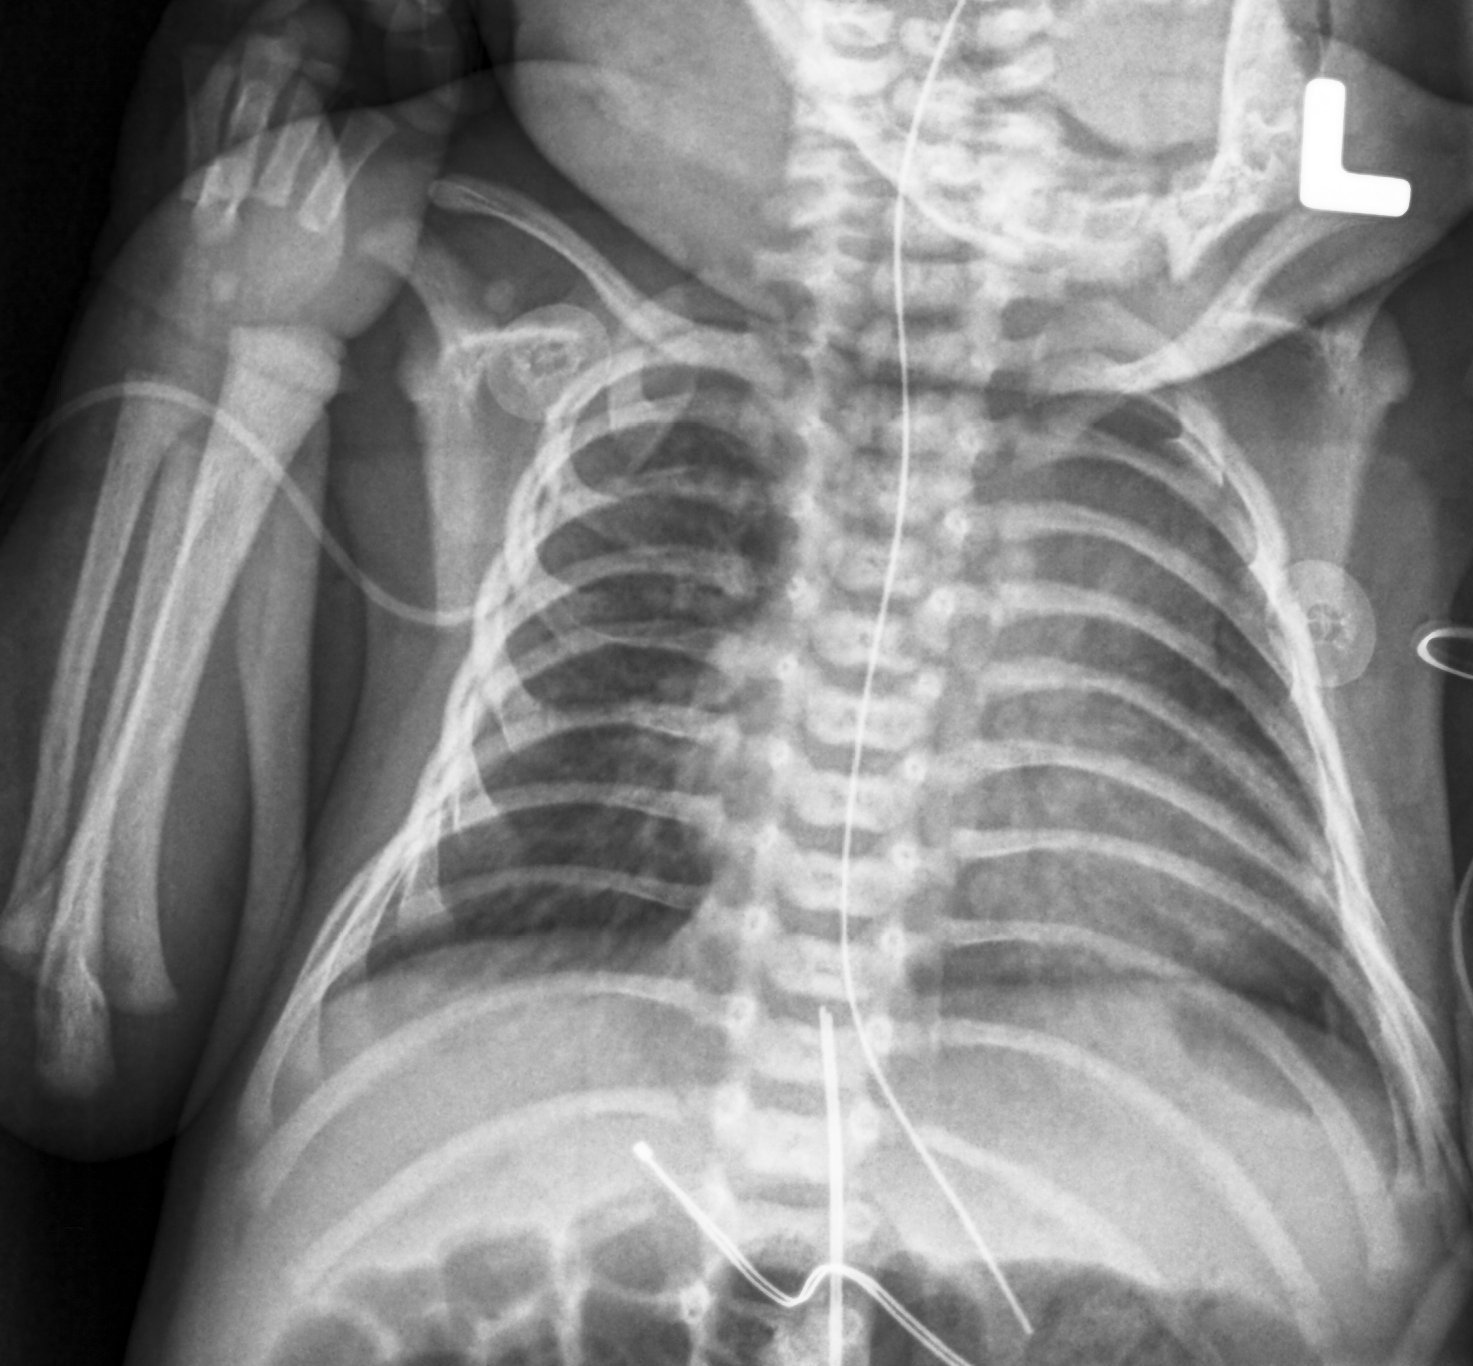 FDA Releases New Guidance on Children's X-ray Exams